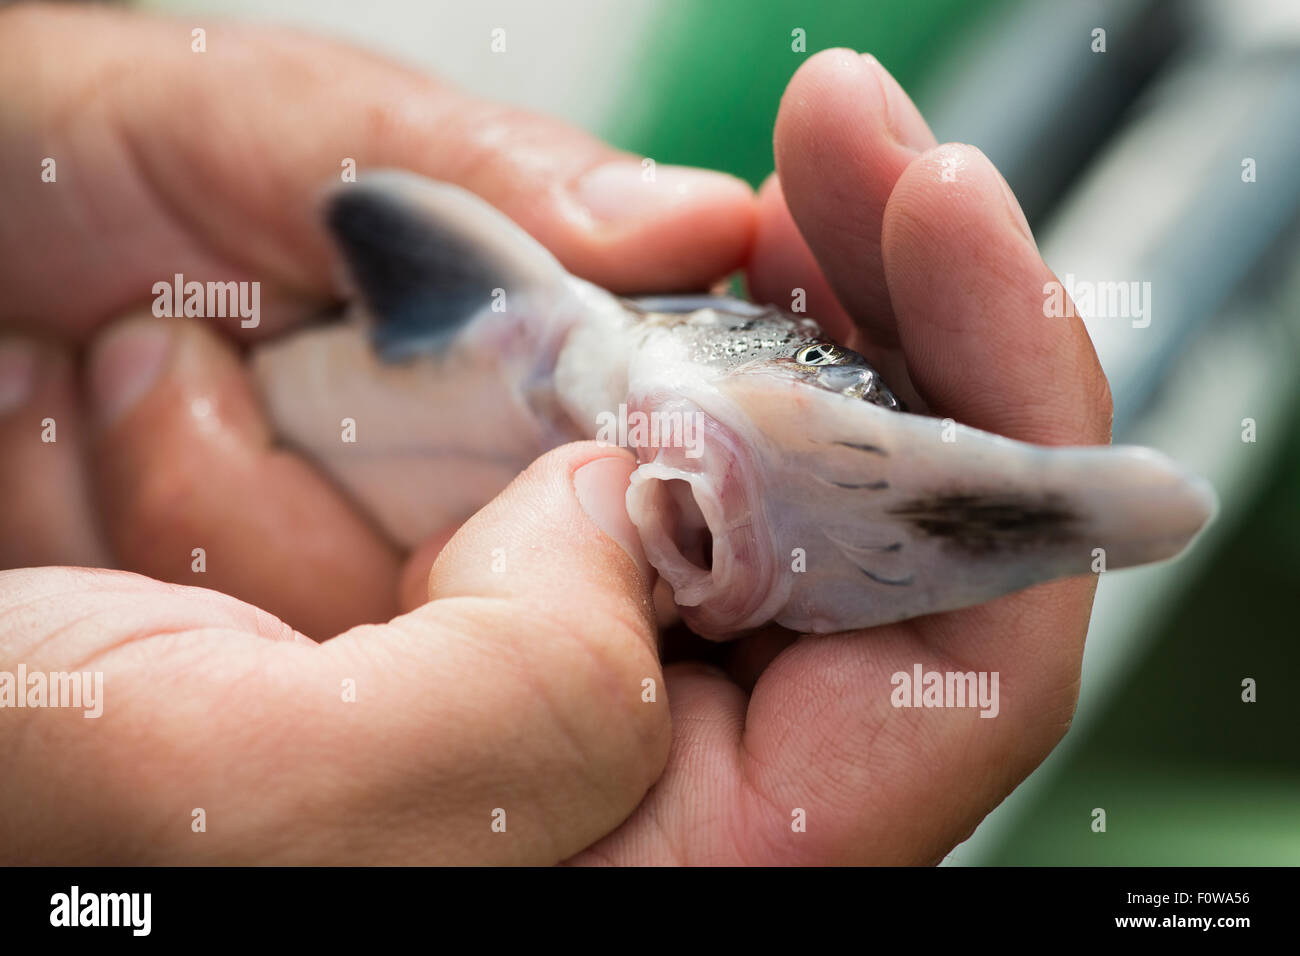 Young Starry sturgeon (Acipenser stellatus) held in hand showing mouth, at Kavoar House farm, Horia village, close to Danube Delta, Romania, June. Critically endangered. Stock Photo